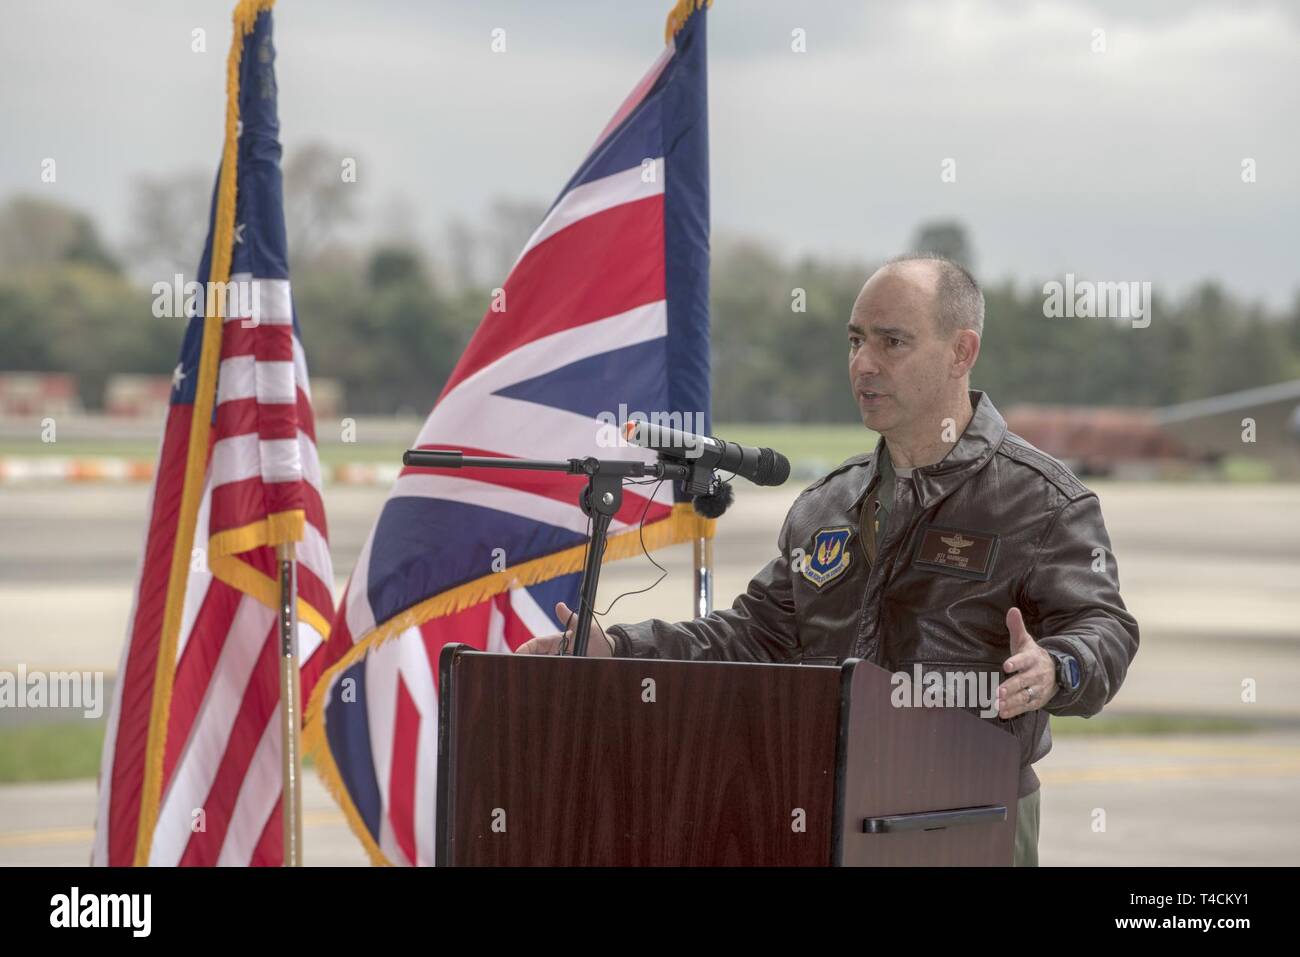 U.S. Air Force Lt. Gen. Jeffrey Harrigian, U.S. Air Forces in Europe and Air Forces Africa deputy commander, speaks during a press conference at RAF Fairford, England, March 19, 2019, regarding the Bomber Task Force Europe deployment. The contingent of B-52 Stratofortress aircraft, Airmen and support equipment is currently deployed from the 2nd Bomb Wing, Barksdale Air Force Base, La., to support the BTF. The deployment of strategic bombers to the U.K. helps exercise RAF Fairford as U.S. Air Forces in Europe - Air Forces Africa’s forward-operating location for bombers. The deployment includes  Stock Photo